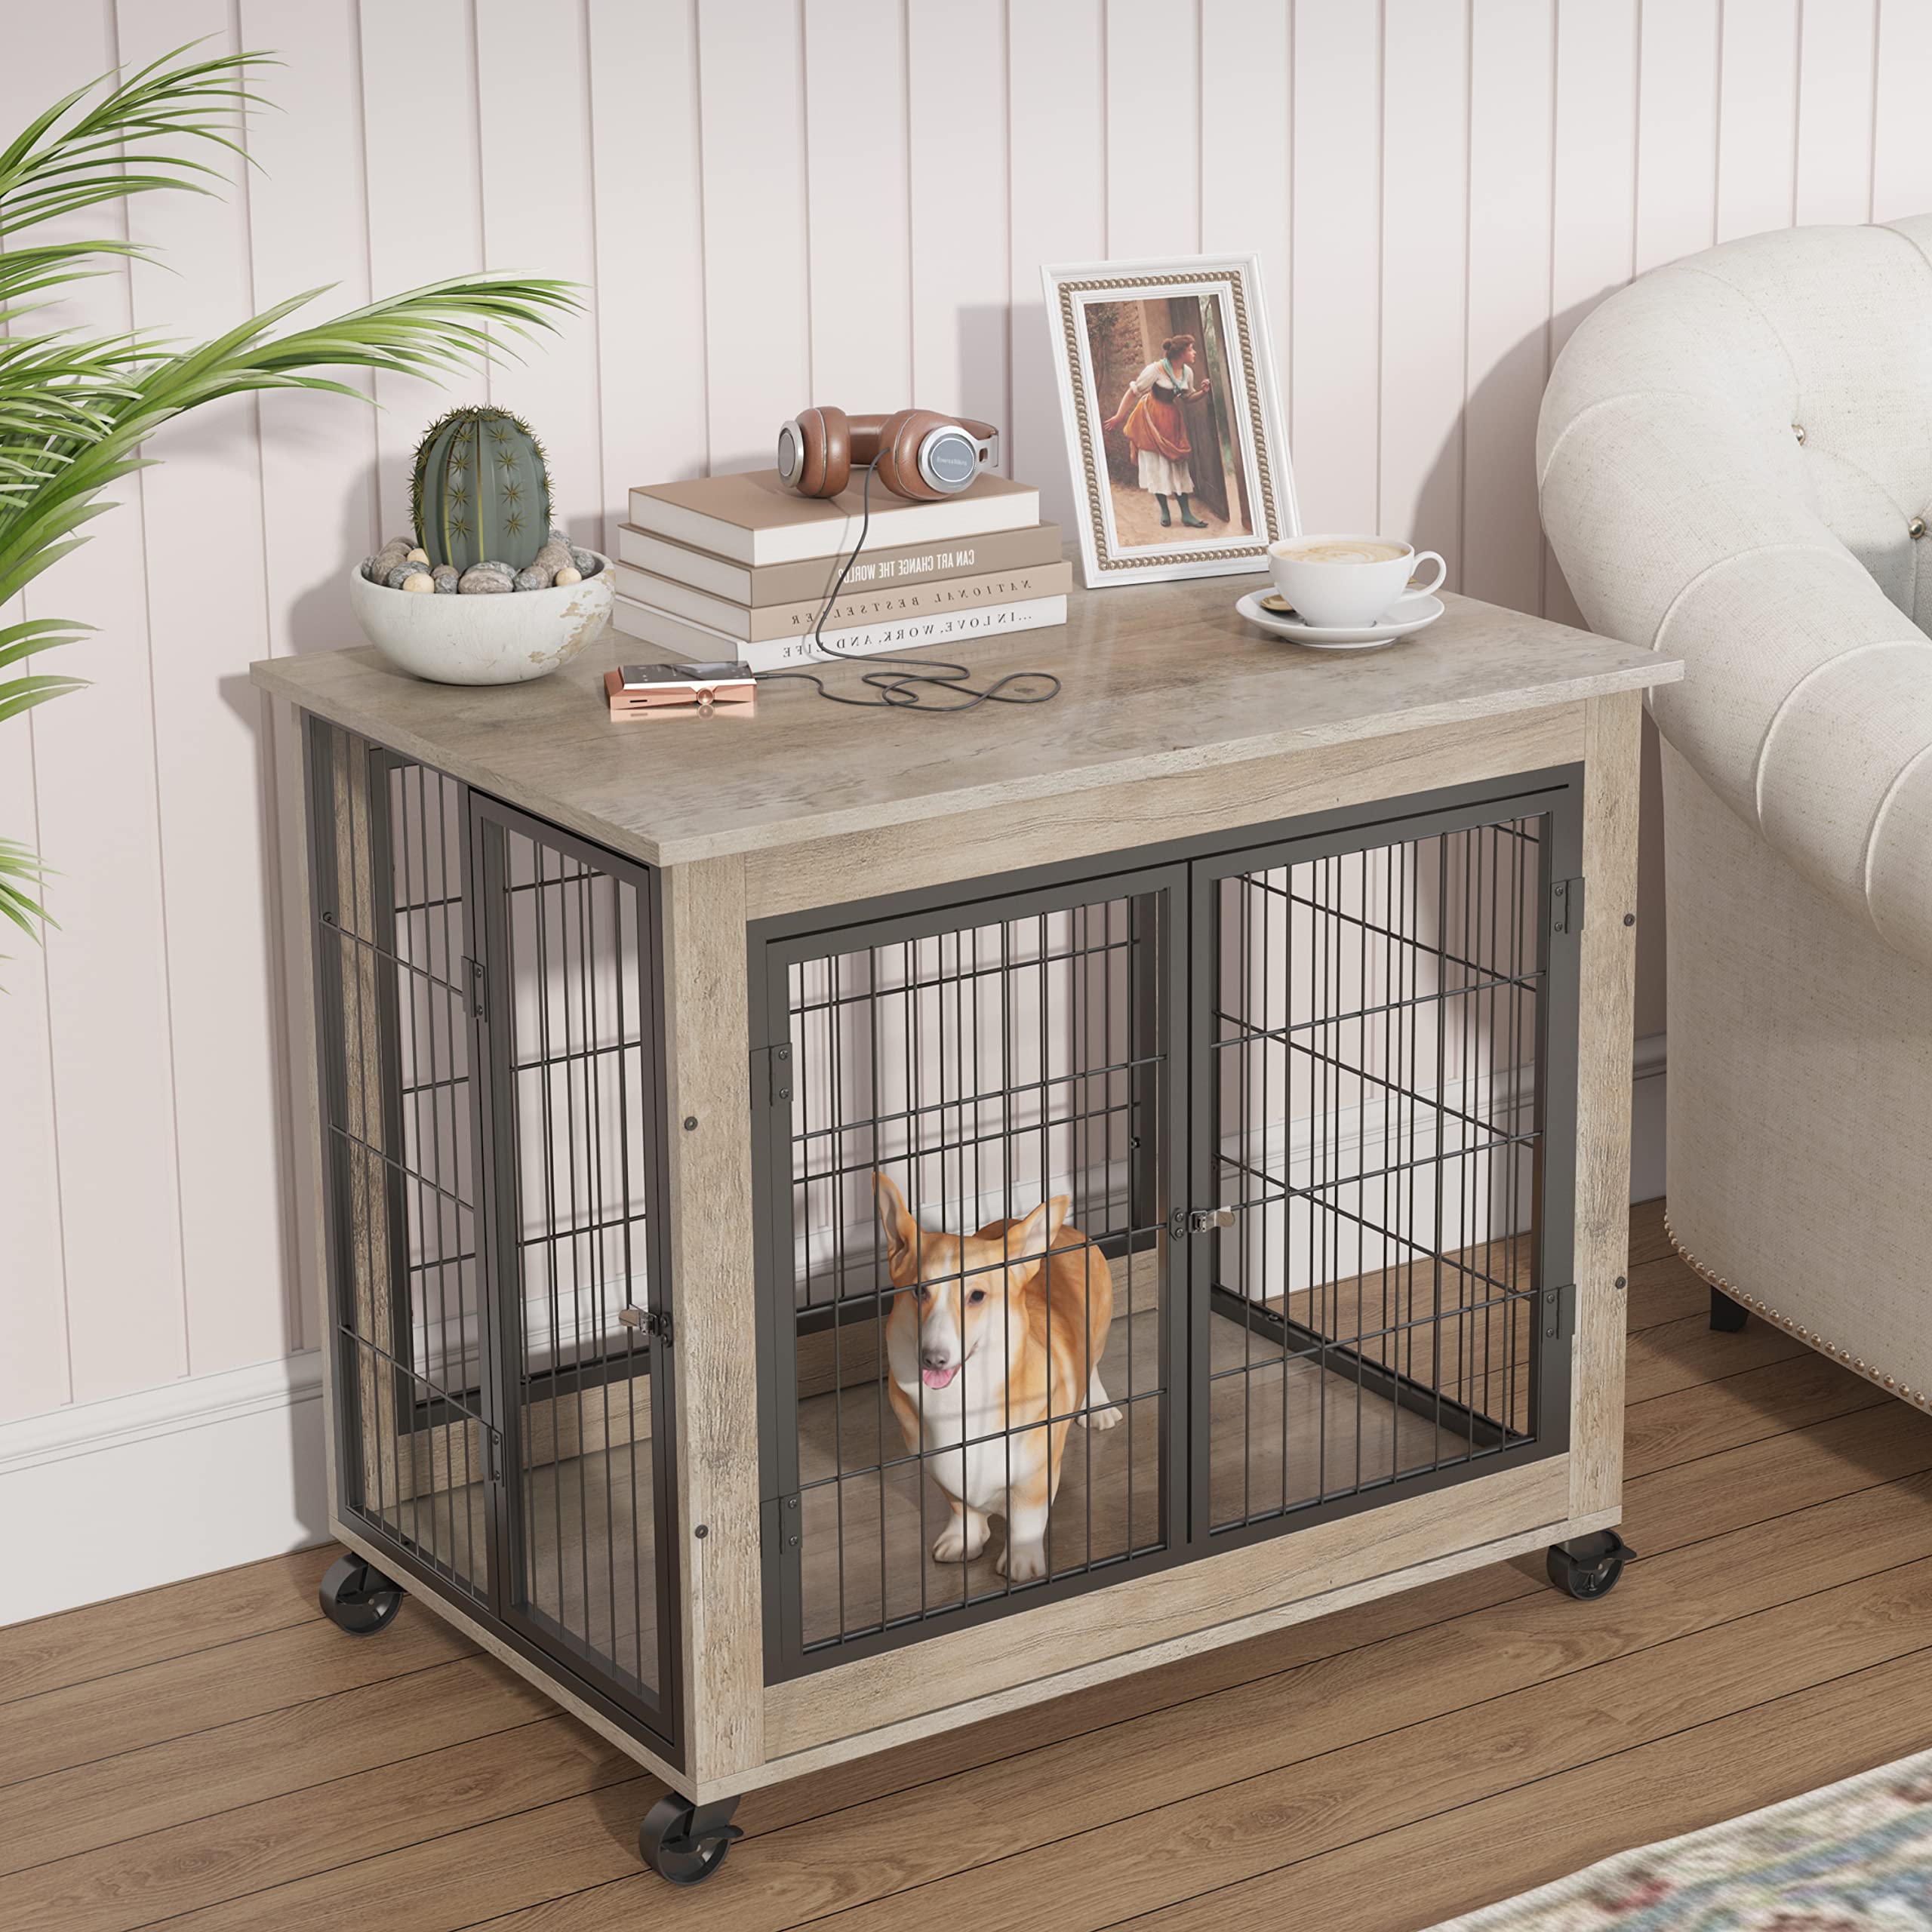 ZSQ Dog crate Table Furniture Dog cage with Double Doors on casters Wooden Pet Kennel Furniture End Table 32W*22D*25H (grey)